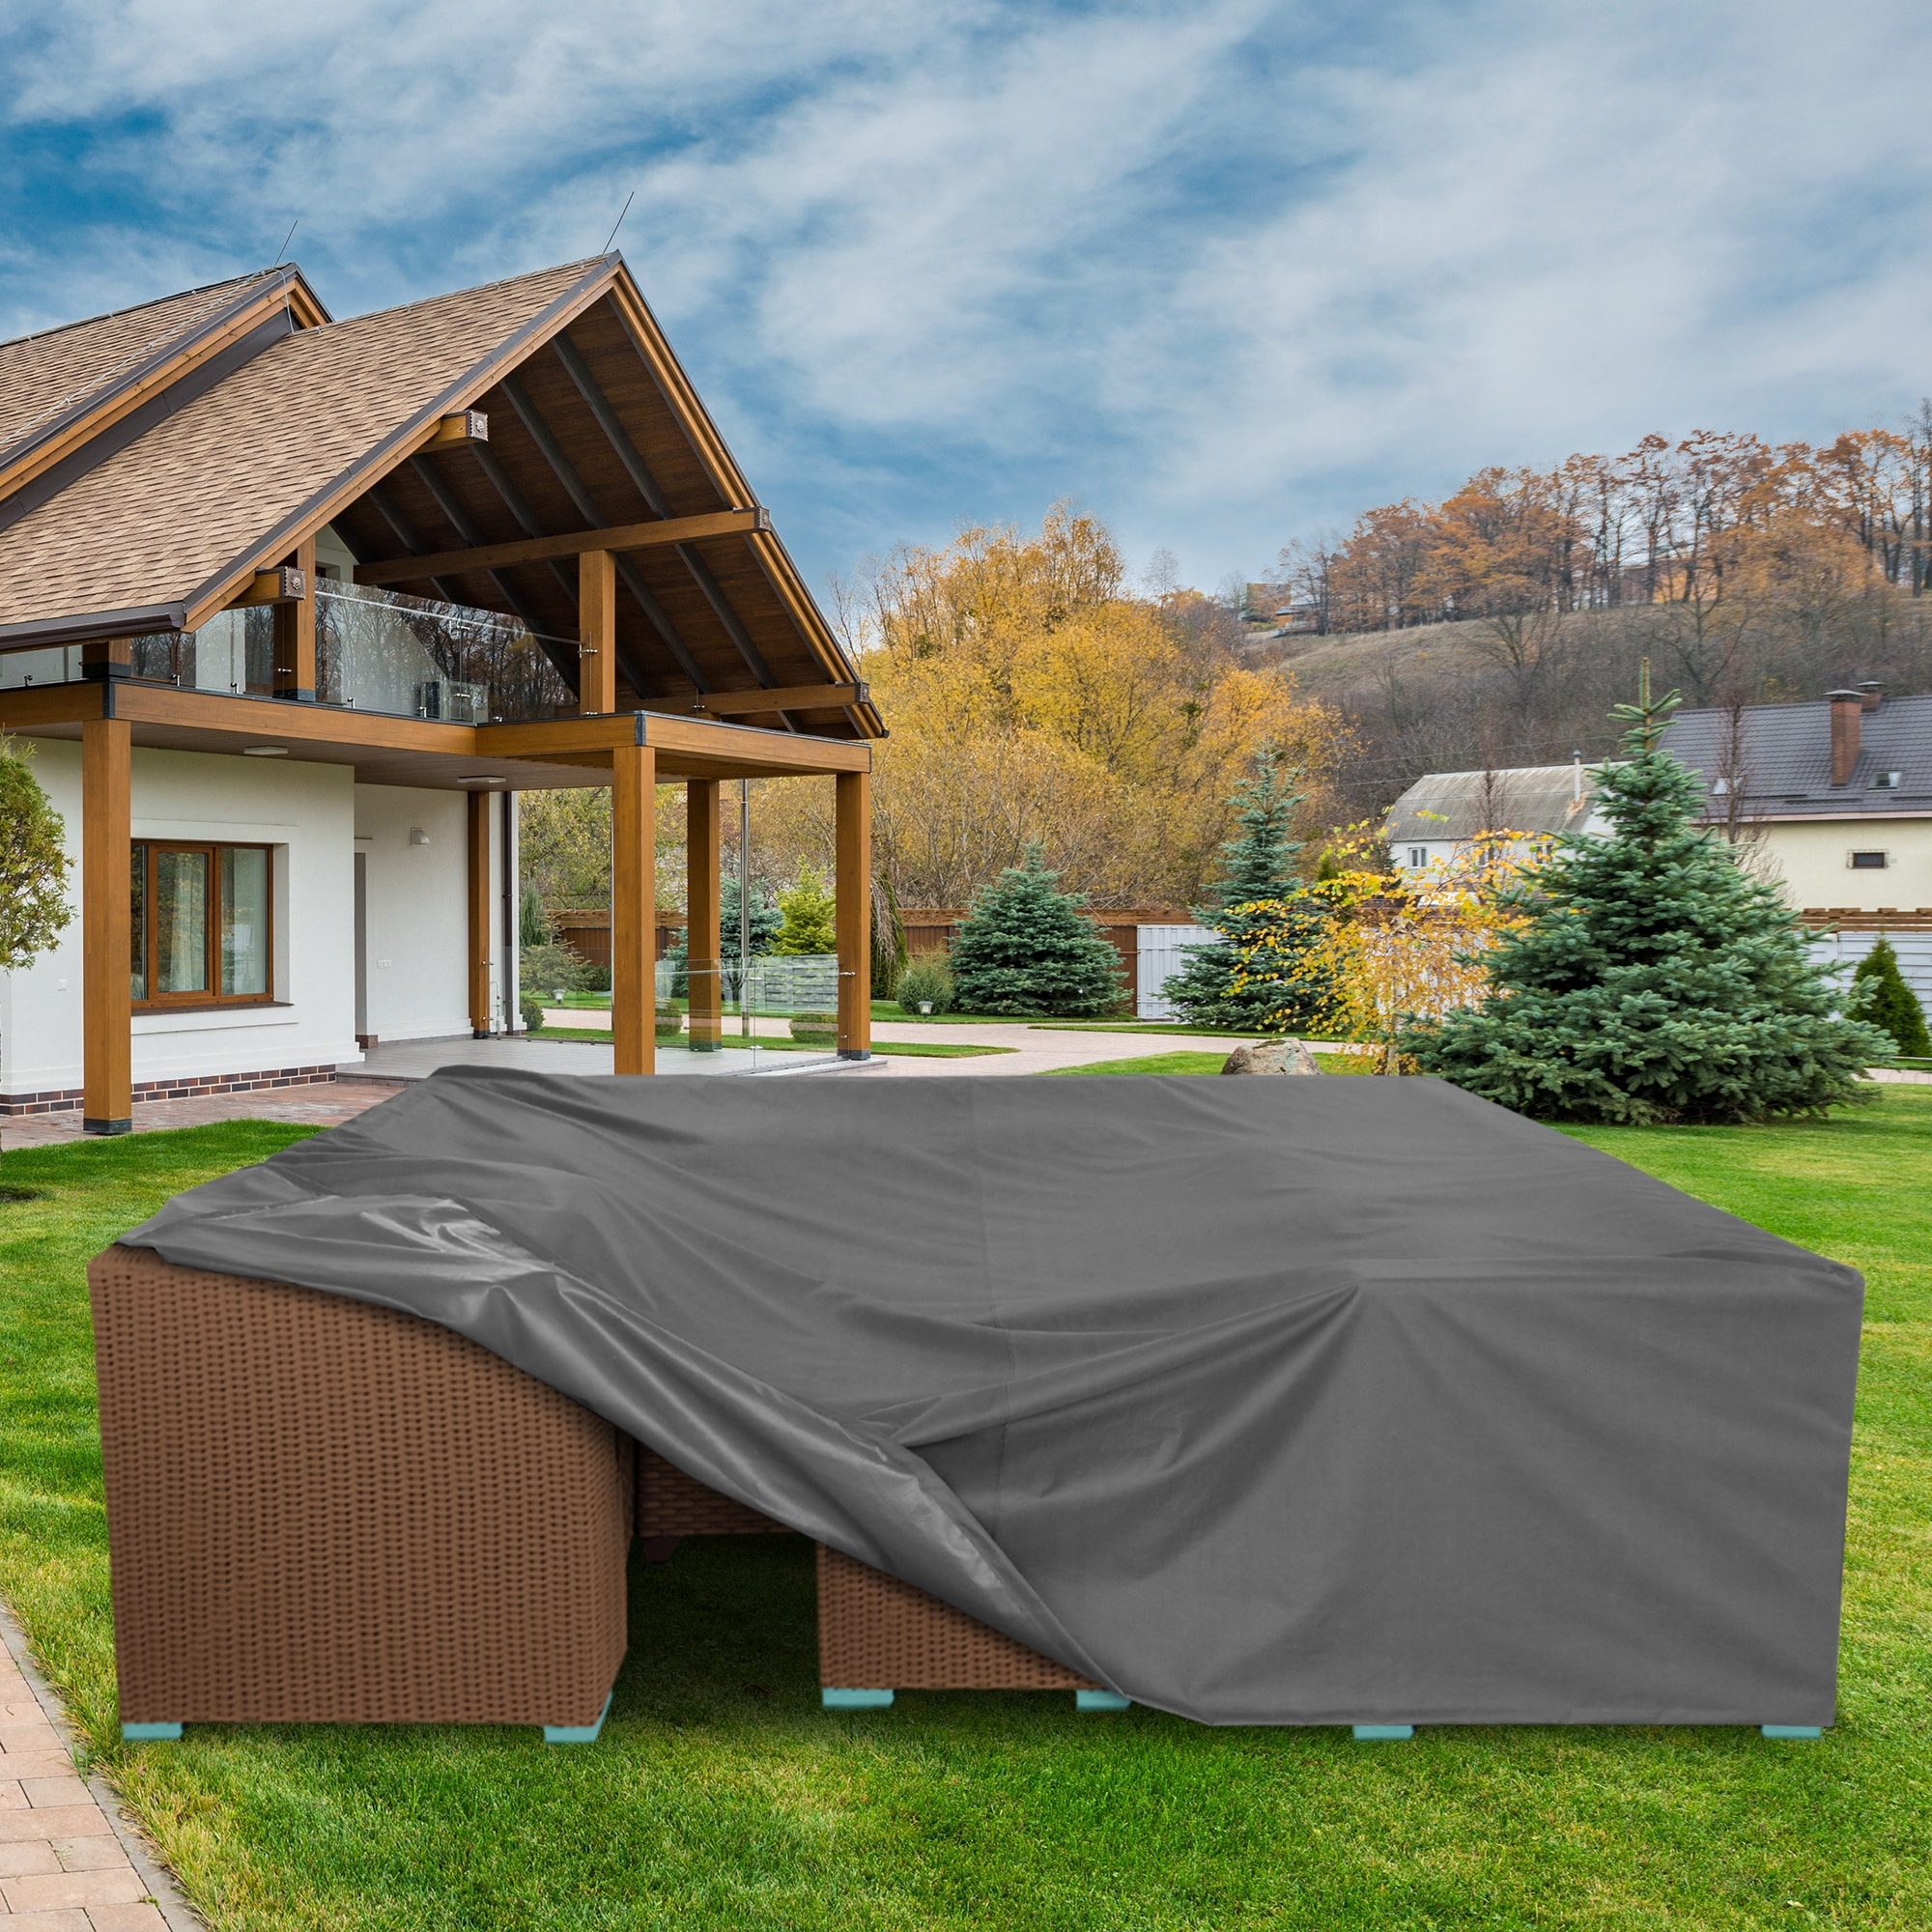 500D Patio Furniture Covers Thickening Outdoor Cover Protective - On Sale -  Bed Bath & Beyond - 33593455